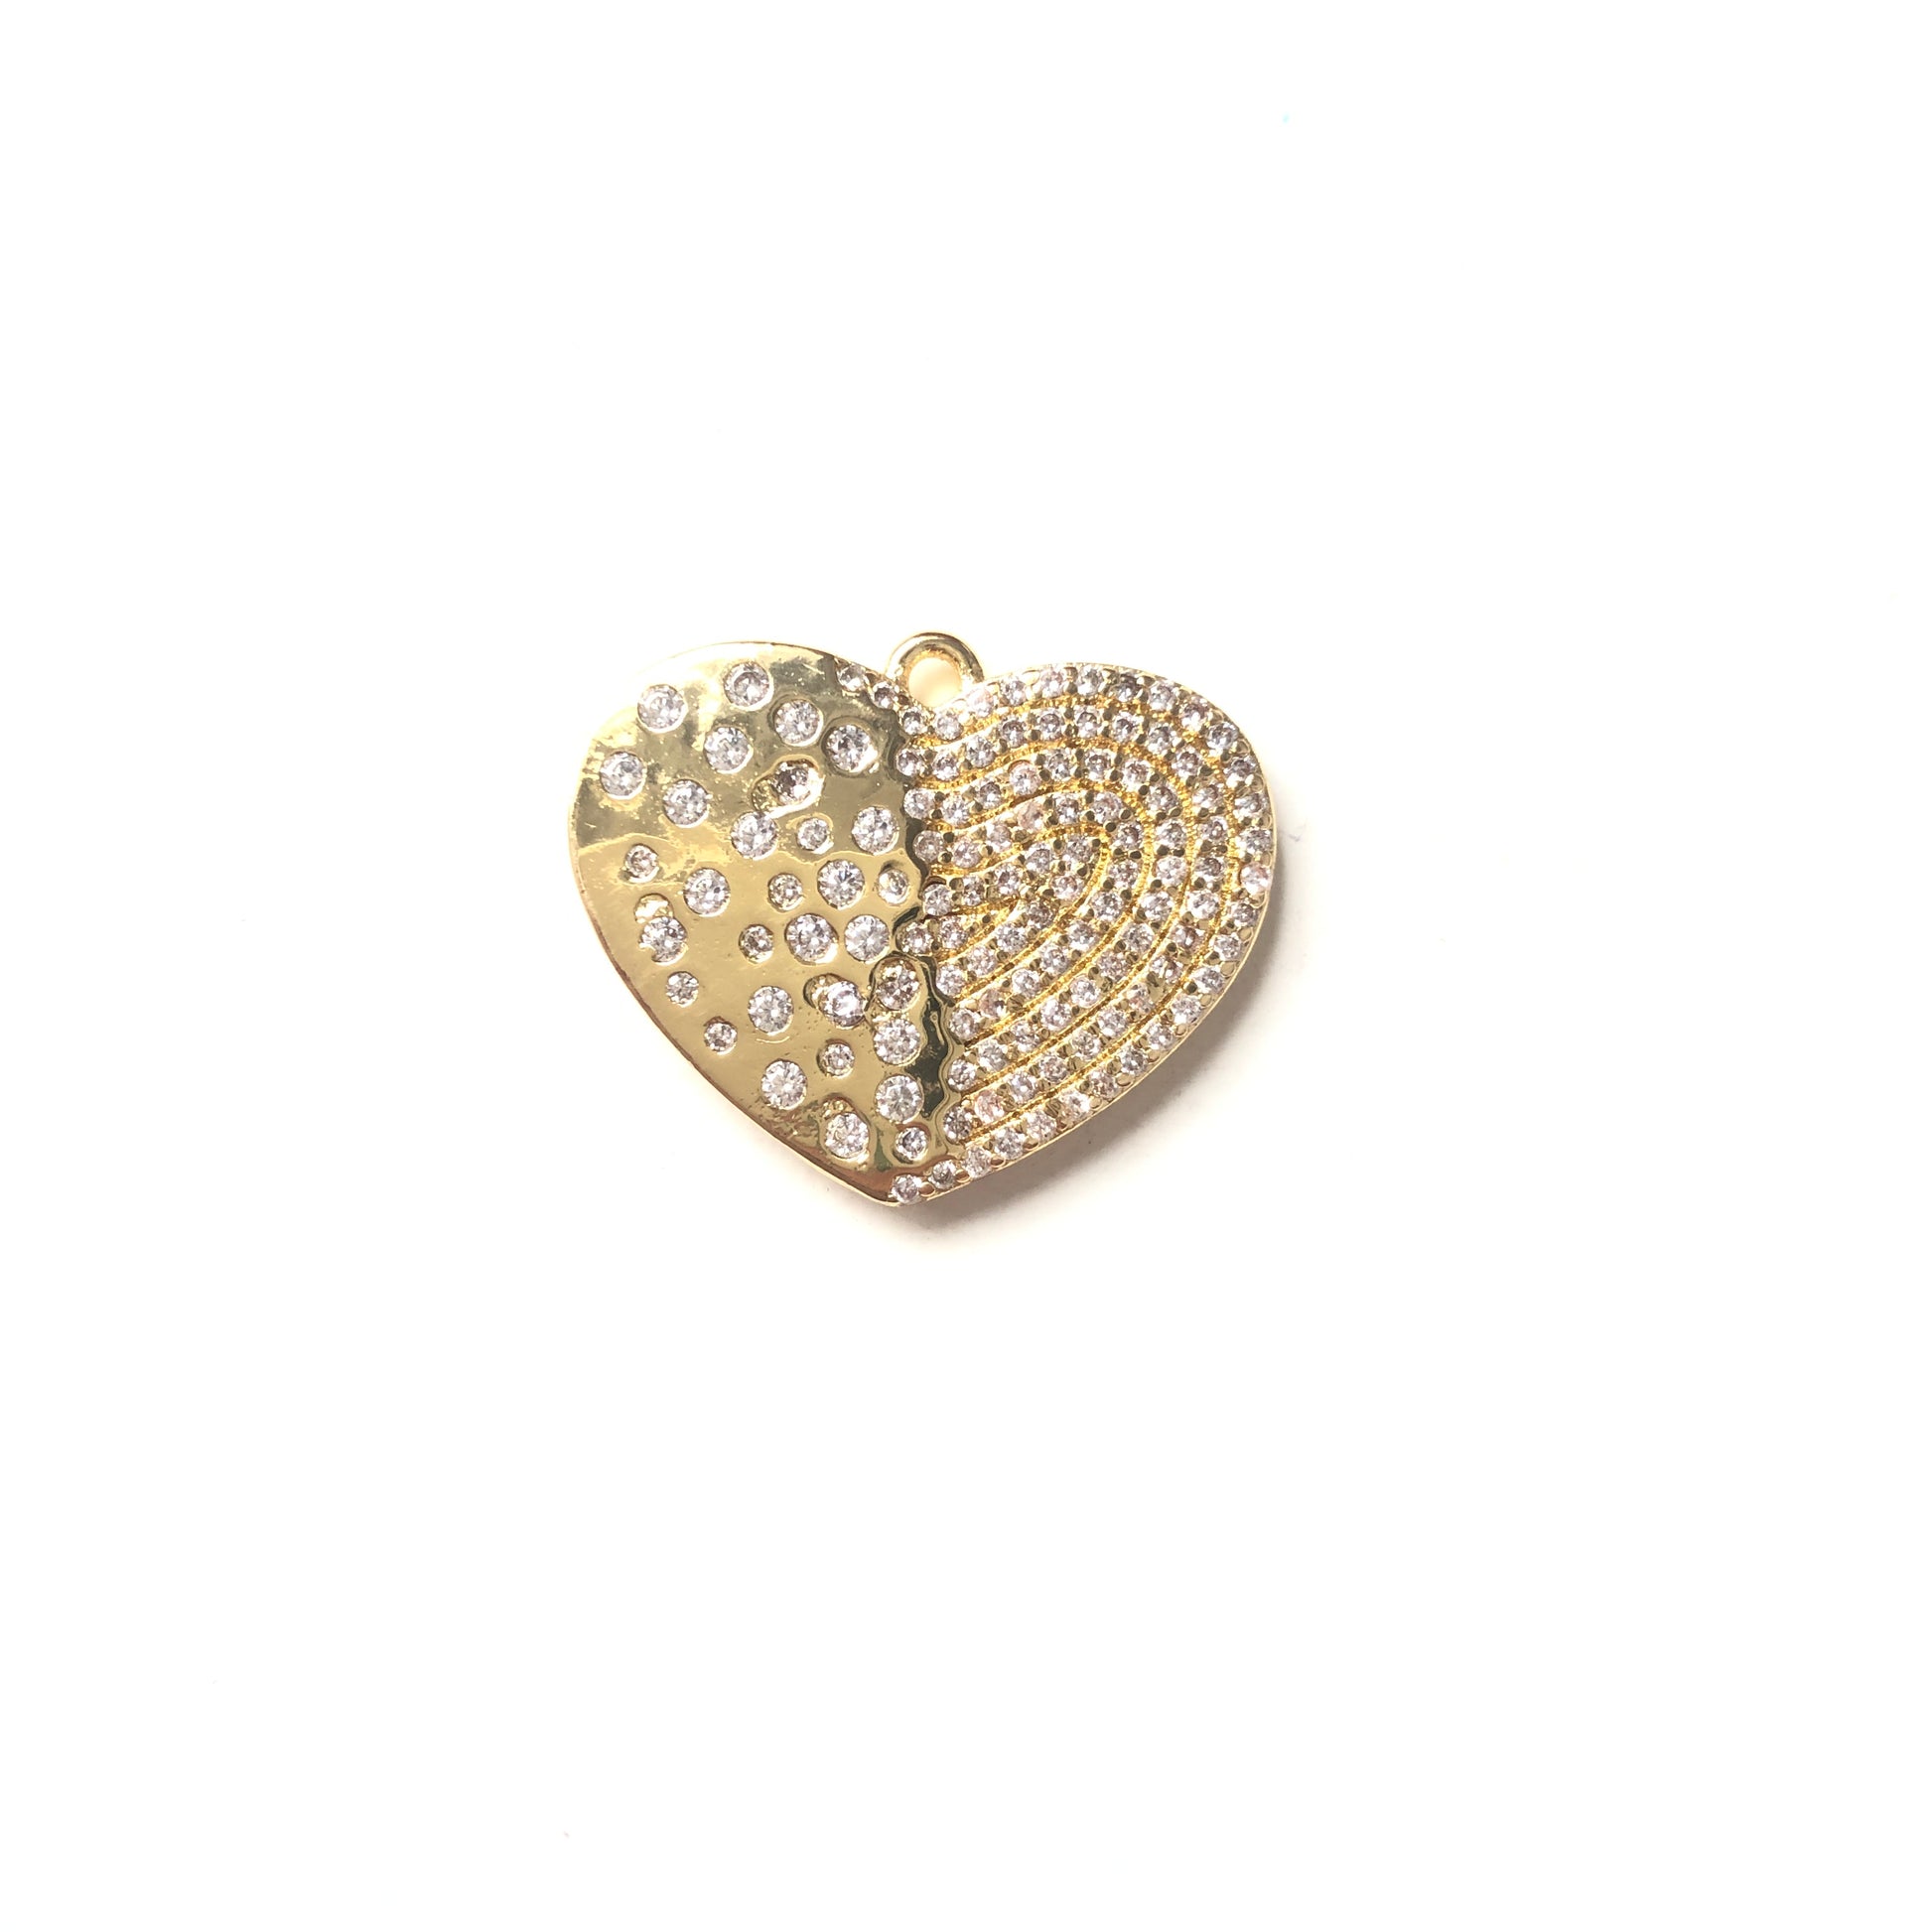 10pcs/lot 20*24.5mm CZ Paved Heart Charms Clear on Gold CZ Paved Charms Colorful Zirconia Hearts Charms Beads Beyond